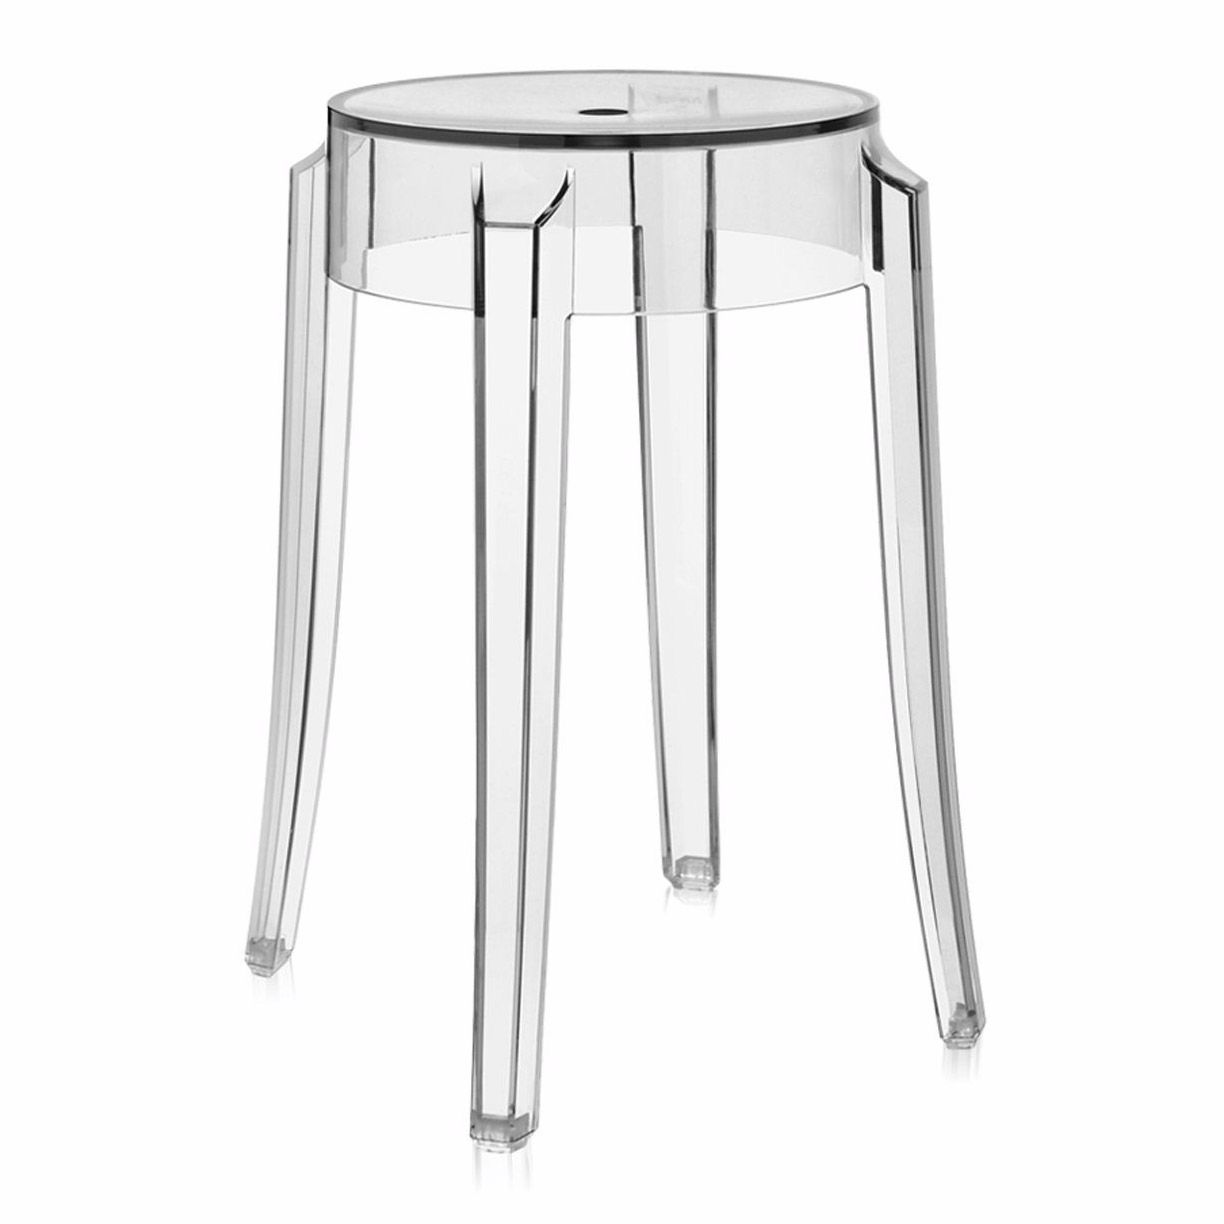 The Stylish and Sleek Ghost Chair Bar Stools: A Must-Have Addition to Your Home